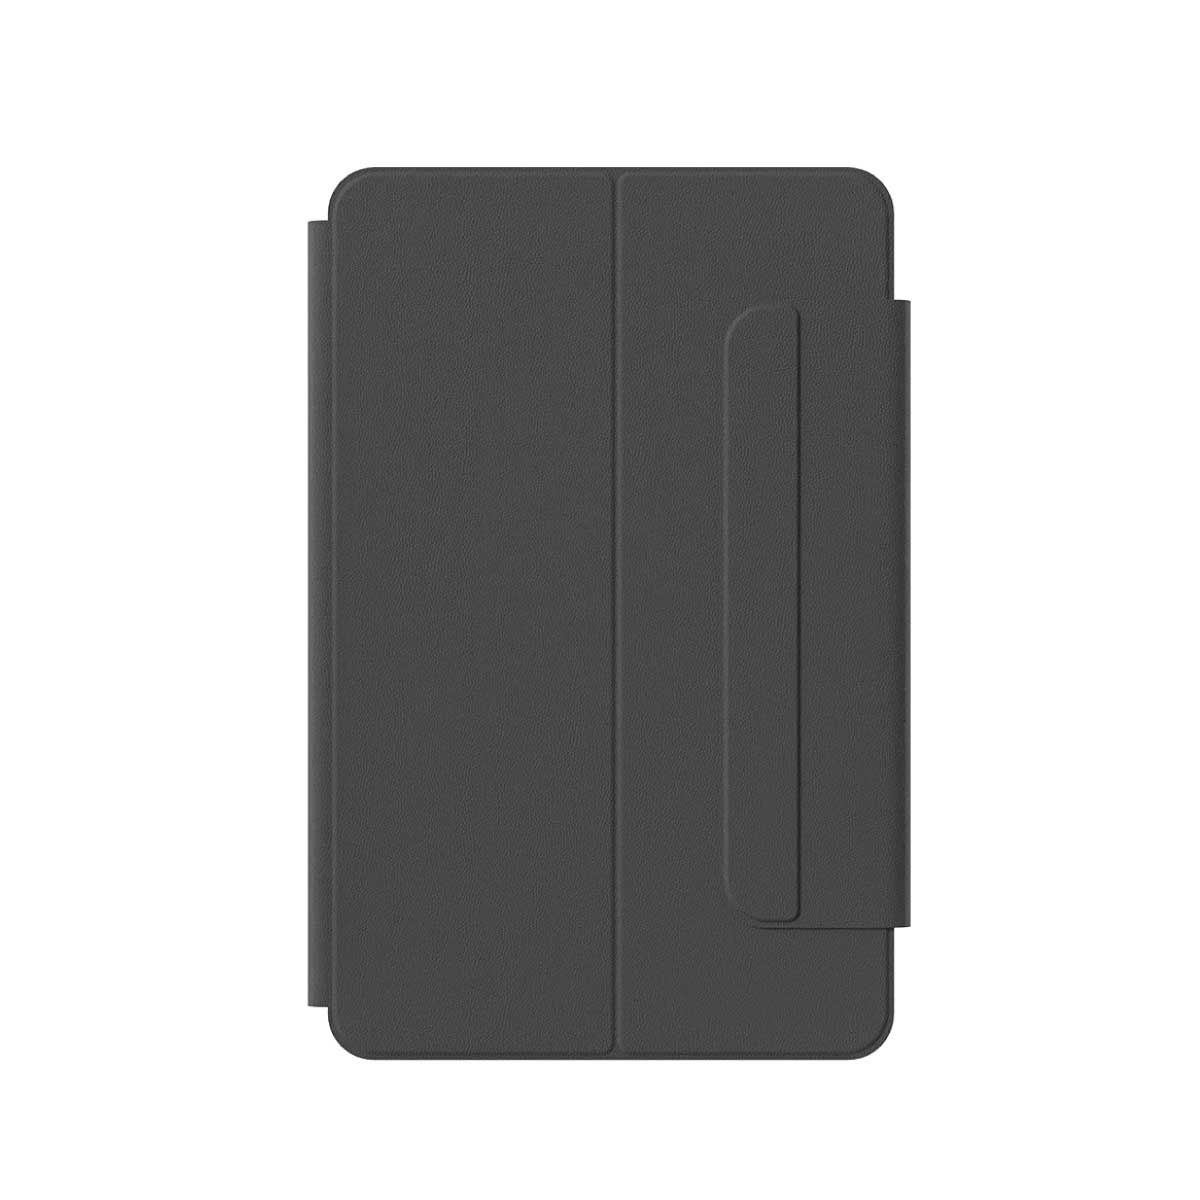 OPPO  Lift Smart Leather Case/Gray